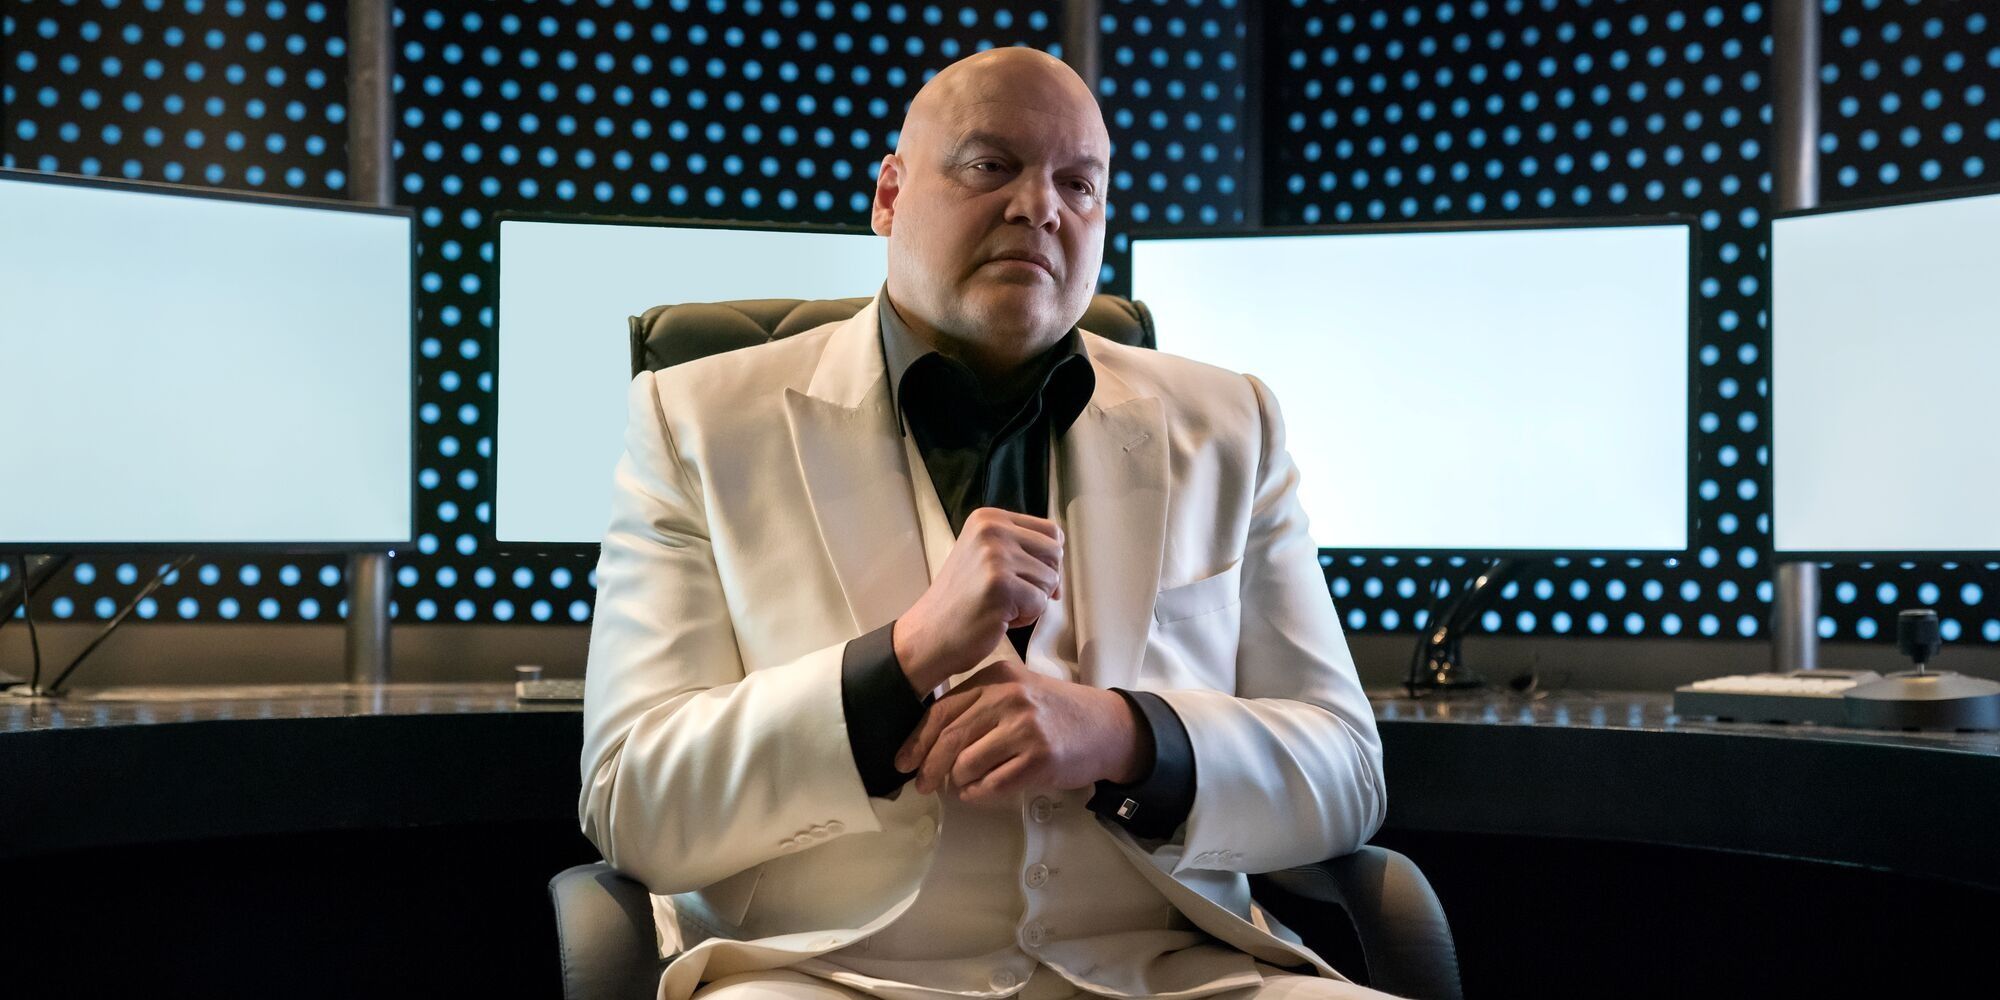 Wilson Fisk sits in chair in his white suit